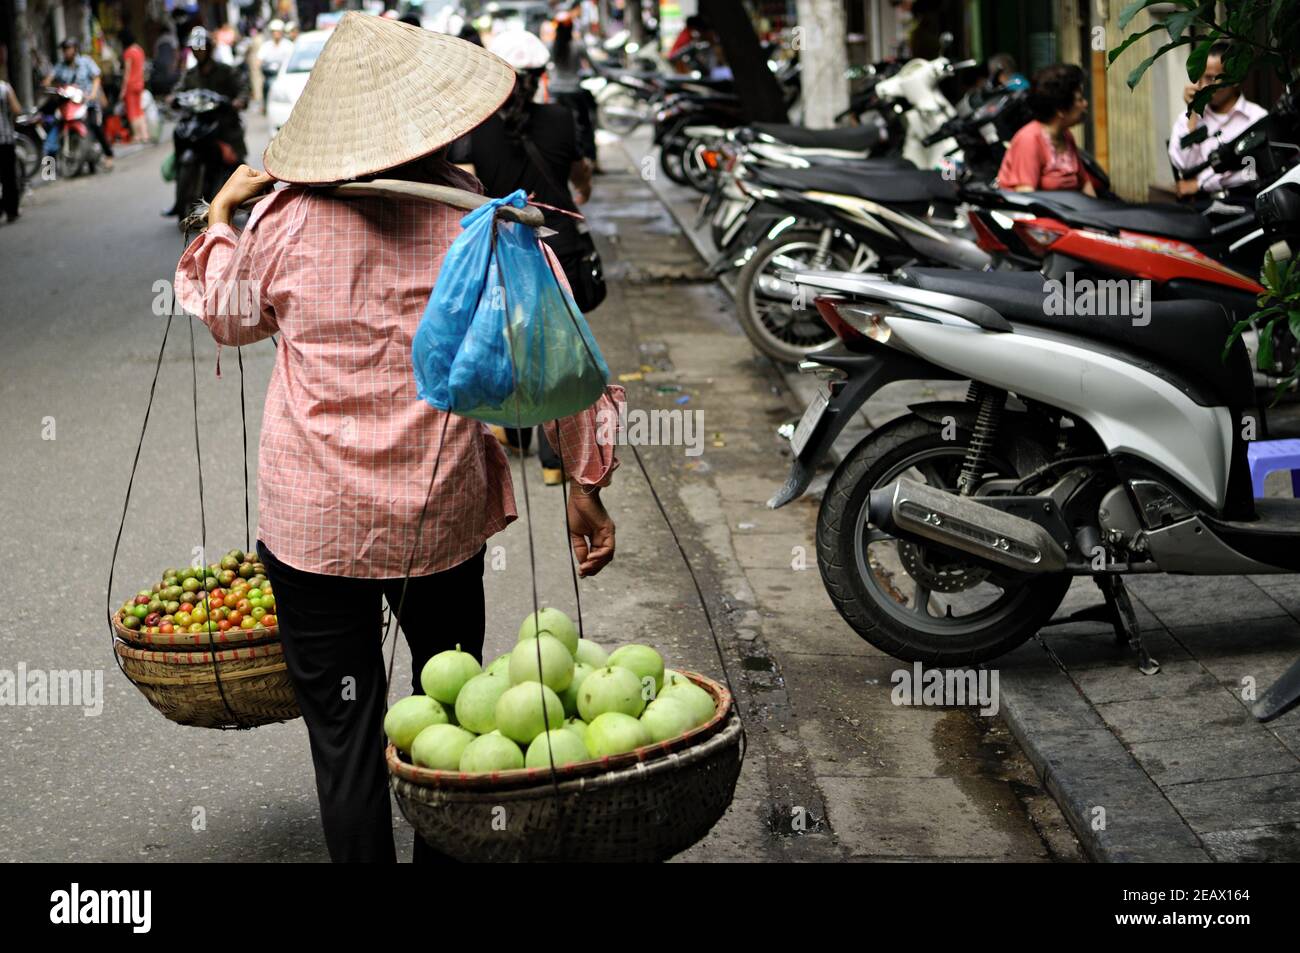 Woman street vendor with a conical hat, Hanoi, Vietnam Stock Photo